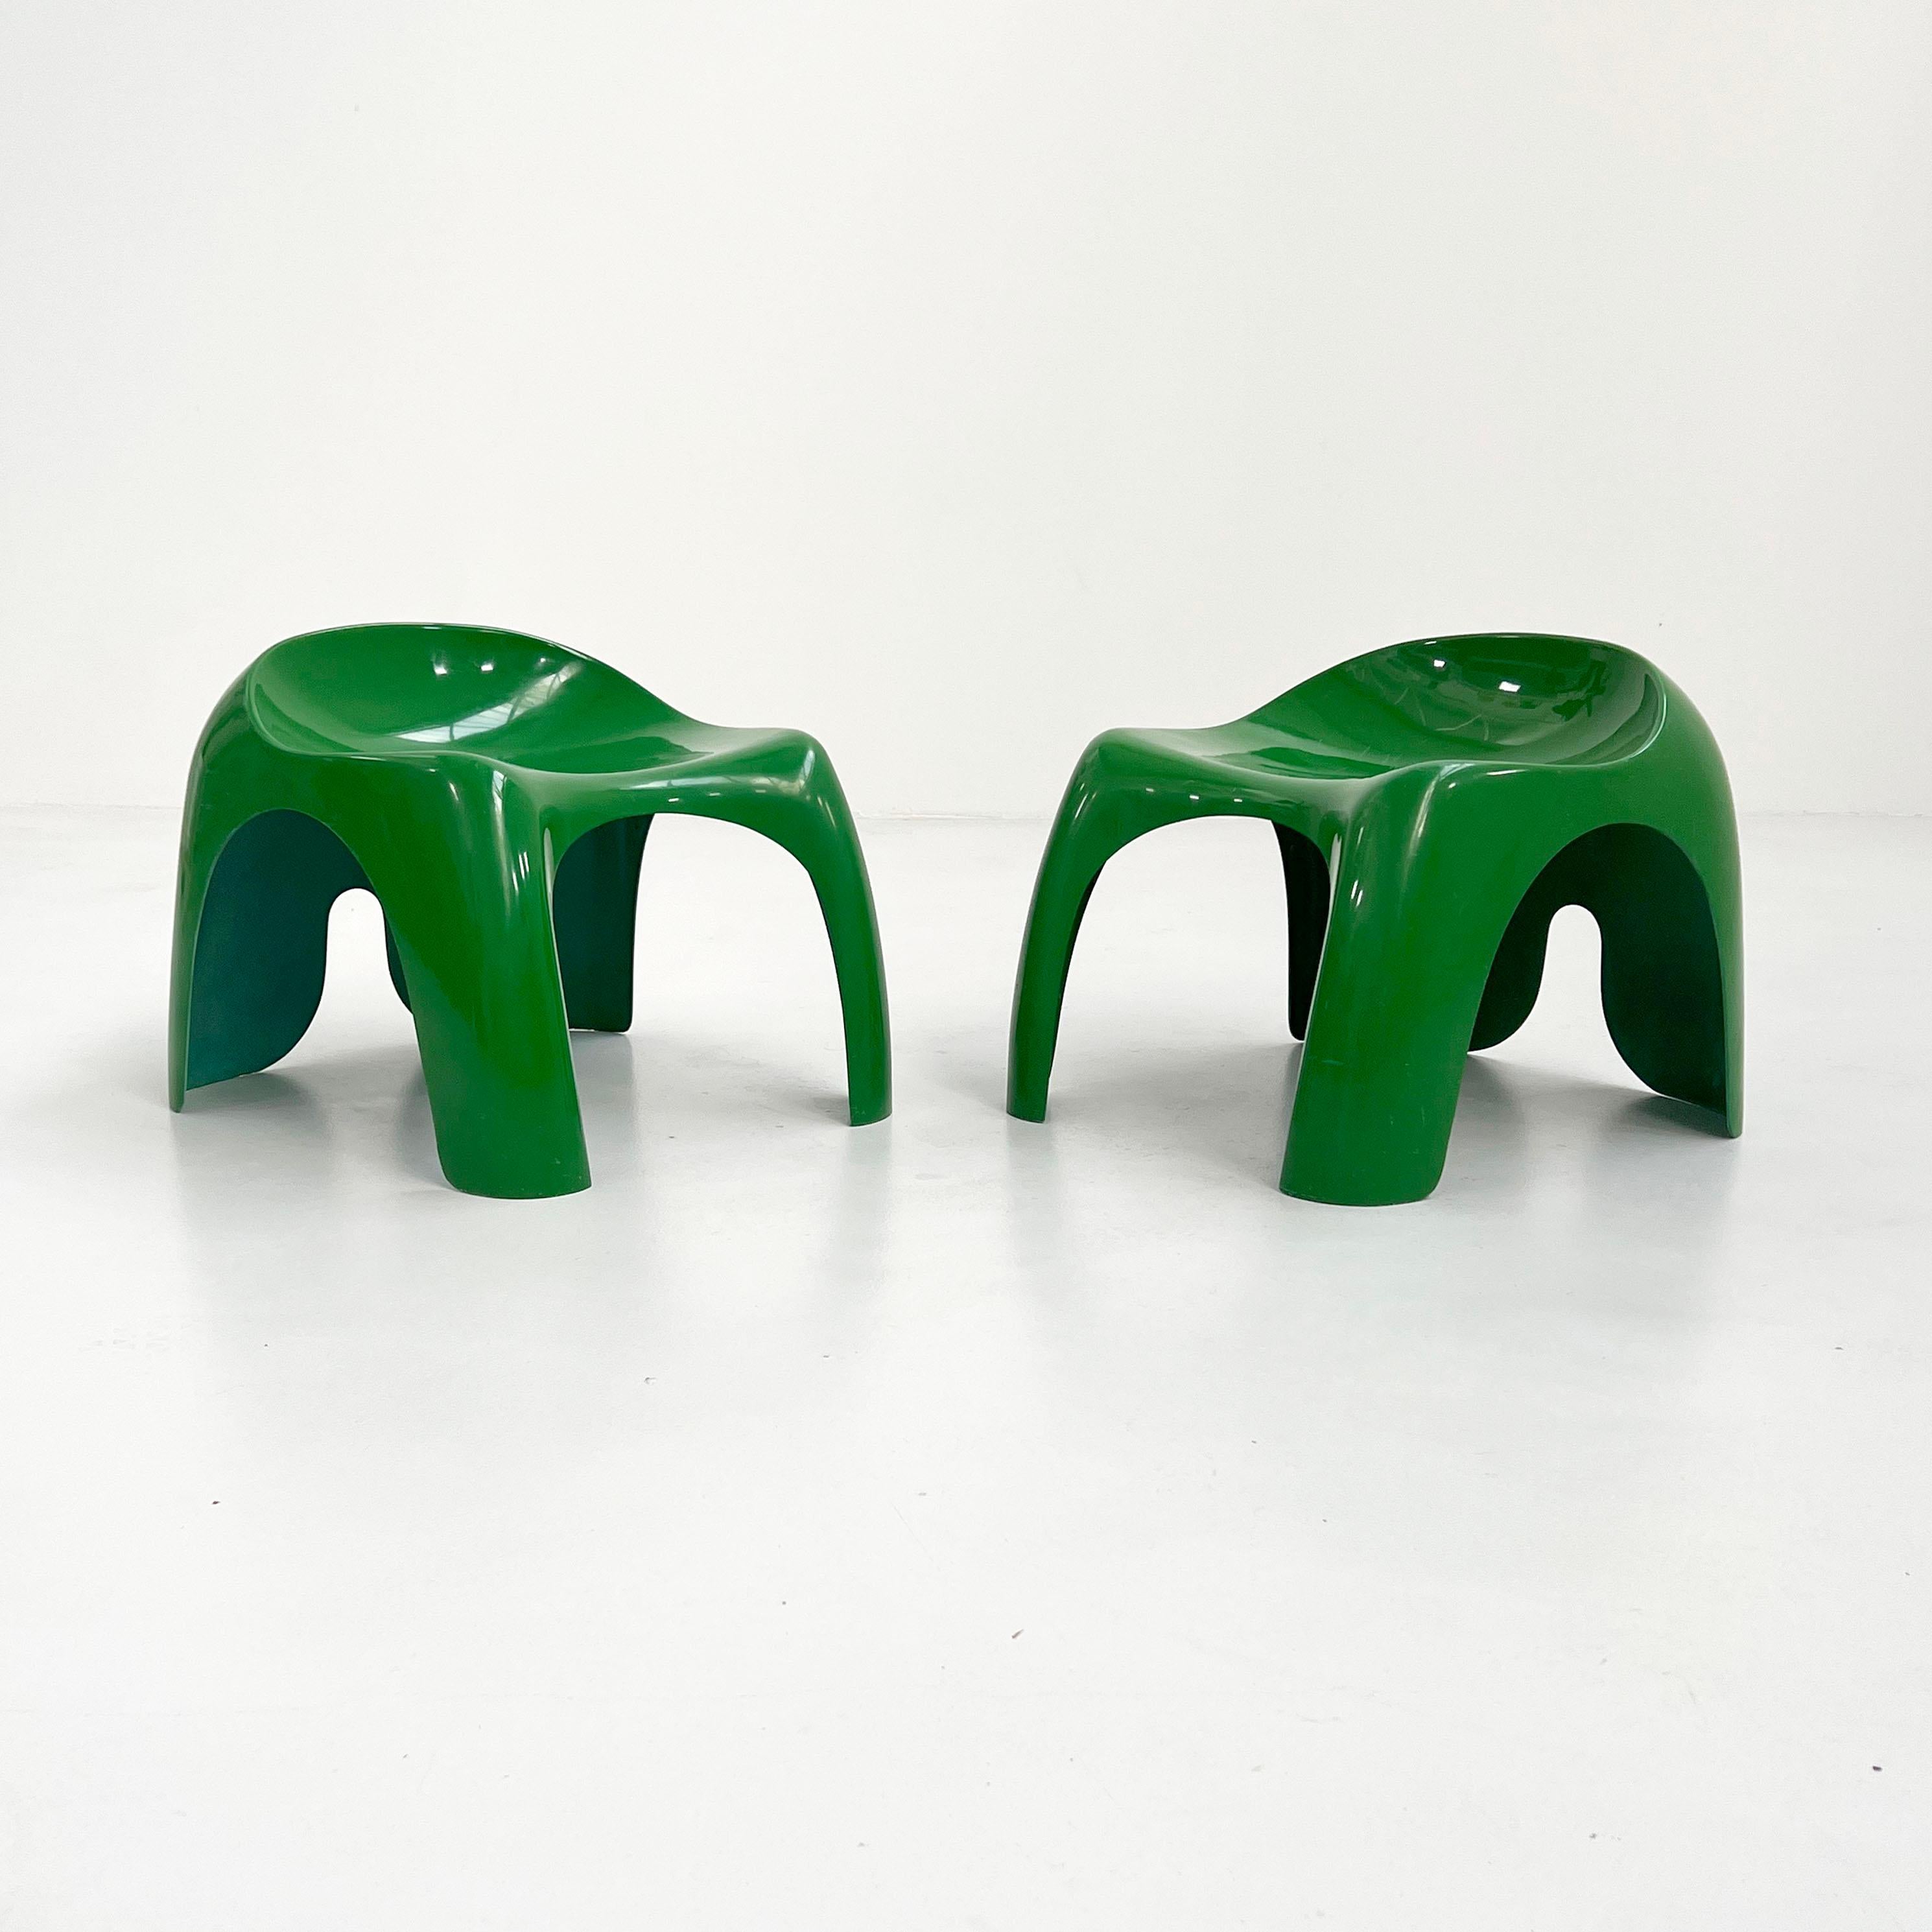 Designer - Stacy Dukes
Producer - Artemide
Model - Efebo Stool
Design Period - Sixties
Measurements - Width 45 cm x Depth 49 cm x Height 40 cm x Seat Height 31 cm
Materials - Plastic
Color - Green
Light wear consistent with age and use. Some light